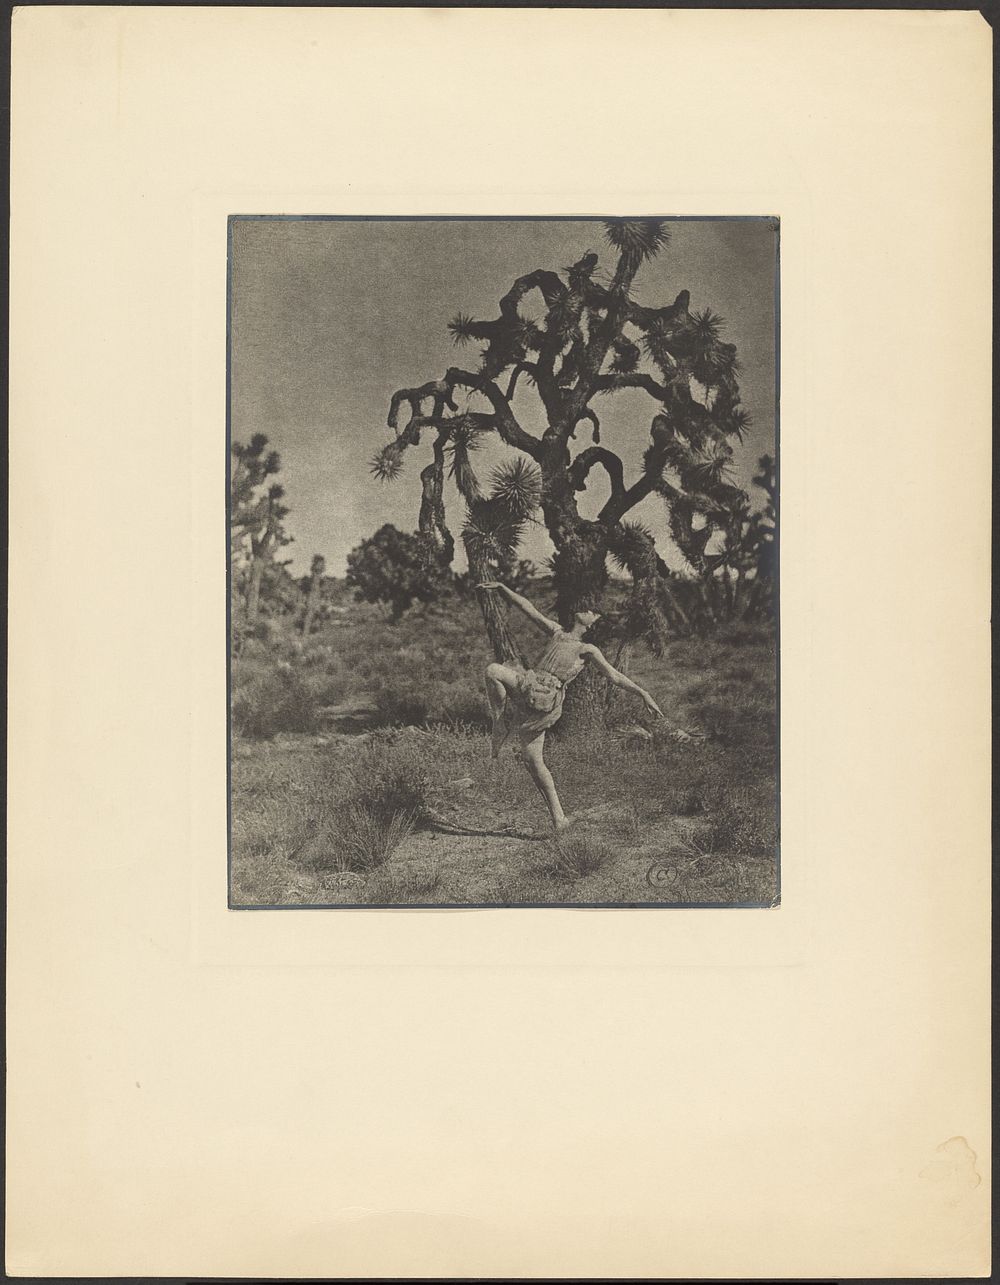 Inspiration of the Dance by Louis Fleckenstein